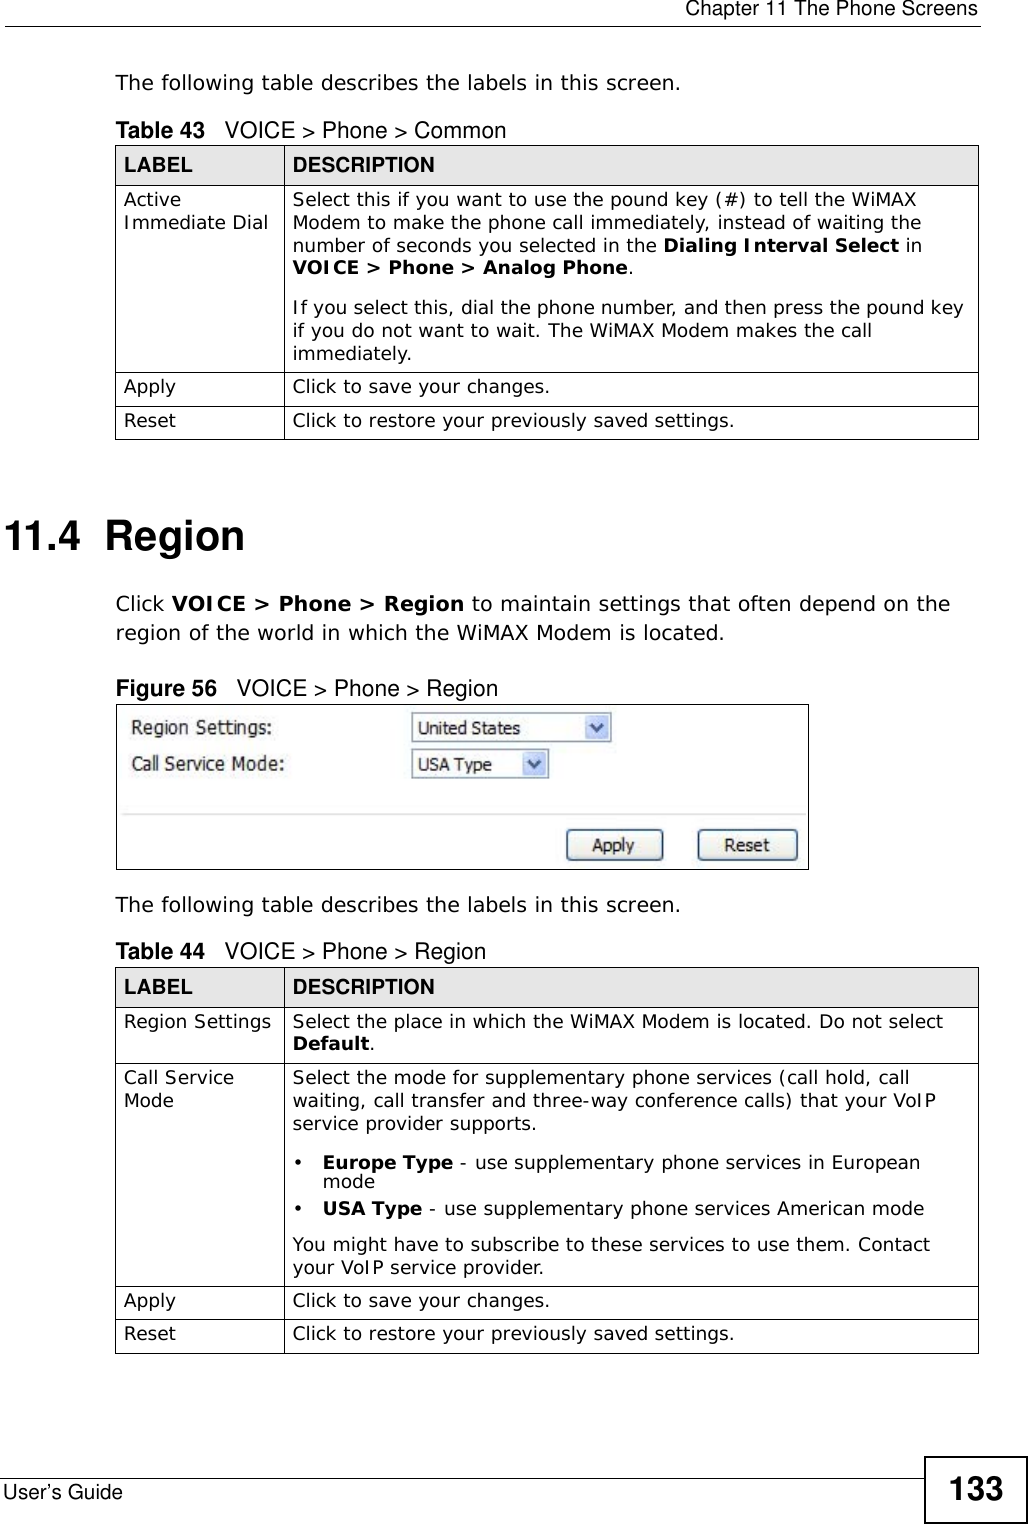  Chapter 11 The Phone ScreensUser’s Guide 133The following table describes the labels in this screen.11.4  RegionClick VOICE &gt; Phone &gt; Region to maintain settings that often depend on the region of the world in which the WiMAX Modem is located.Figure 56   VOICE &gt; Phone &gt; RegionThe following table describes the labels in this screen.Table 43   VOICE &gt; Phone &gt; CommonLABEL DESCRIPTIONActive Immediate Dial Select this if you want to use the pound key (#) to tell the WiMAX Modem to make the phone call immediately, instead of waiting the number of seconds you selected in the Dialing Interval Select in VOICE &gt; Phone &gt; Analog Phone.If you select this, dial the phone number, and then press the pound key if you do not want to wait. The WiMAX Modem makes the call immediately. Apply Click to save your changes.Reset Click to restore your previously saved settings.Table 44   VOICE &gt; Phone &gt; RegionLABEL DESCRIPTIONRegion Settings Select the place in which the WiMAX Modem is located. Do not select Default.Call Service Mode Select the mode for supplementary phone services (call hold, call waiting, call transfer and three-way conference calls) that your VoIP service provider supports.•Europe Type - use supplementary phone services in European mode•USA Type - use supplementary phone services American modeYou might have to subscribe to these services to use them. Contact your VoIP service provider.Apply Click to save your changes.Reset Click to restore your previously saved settings.